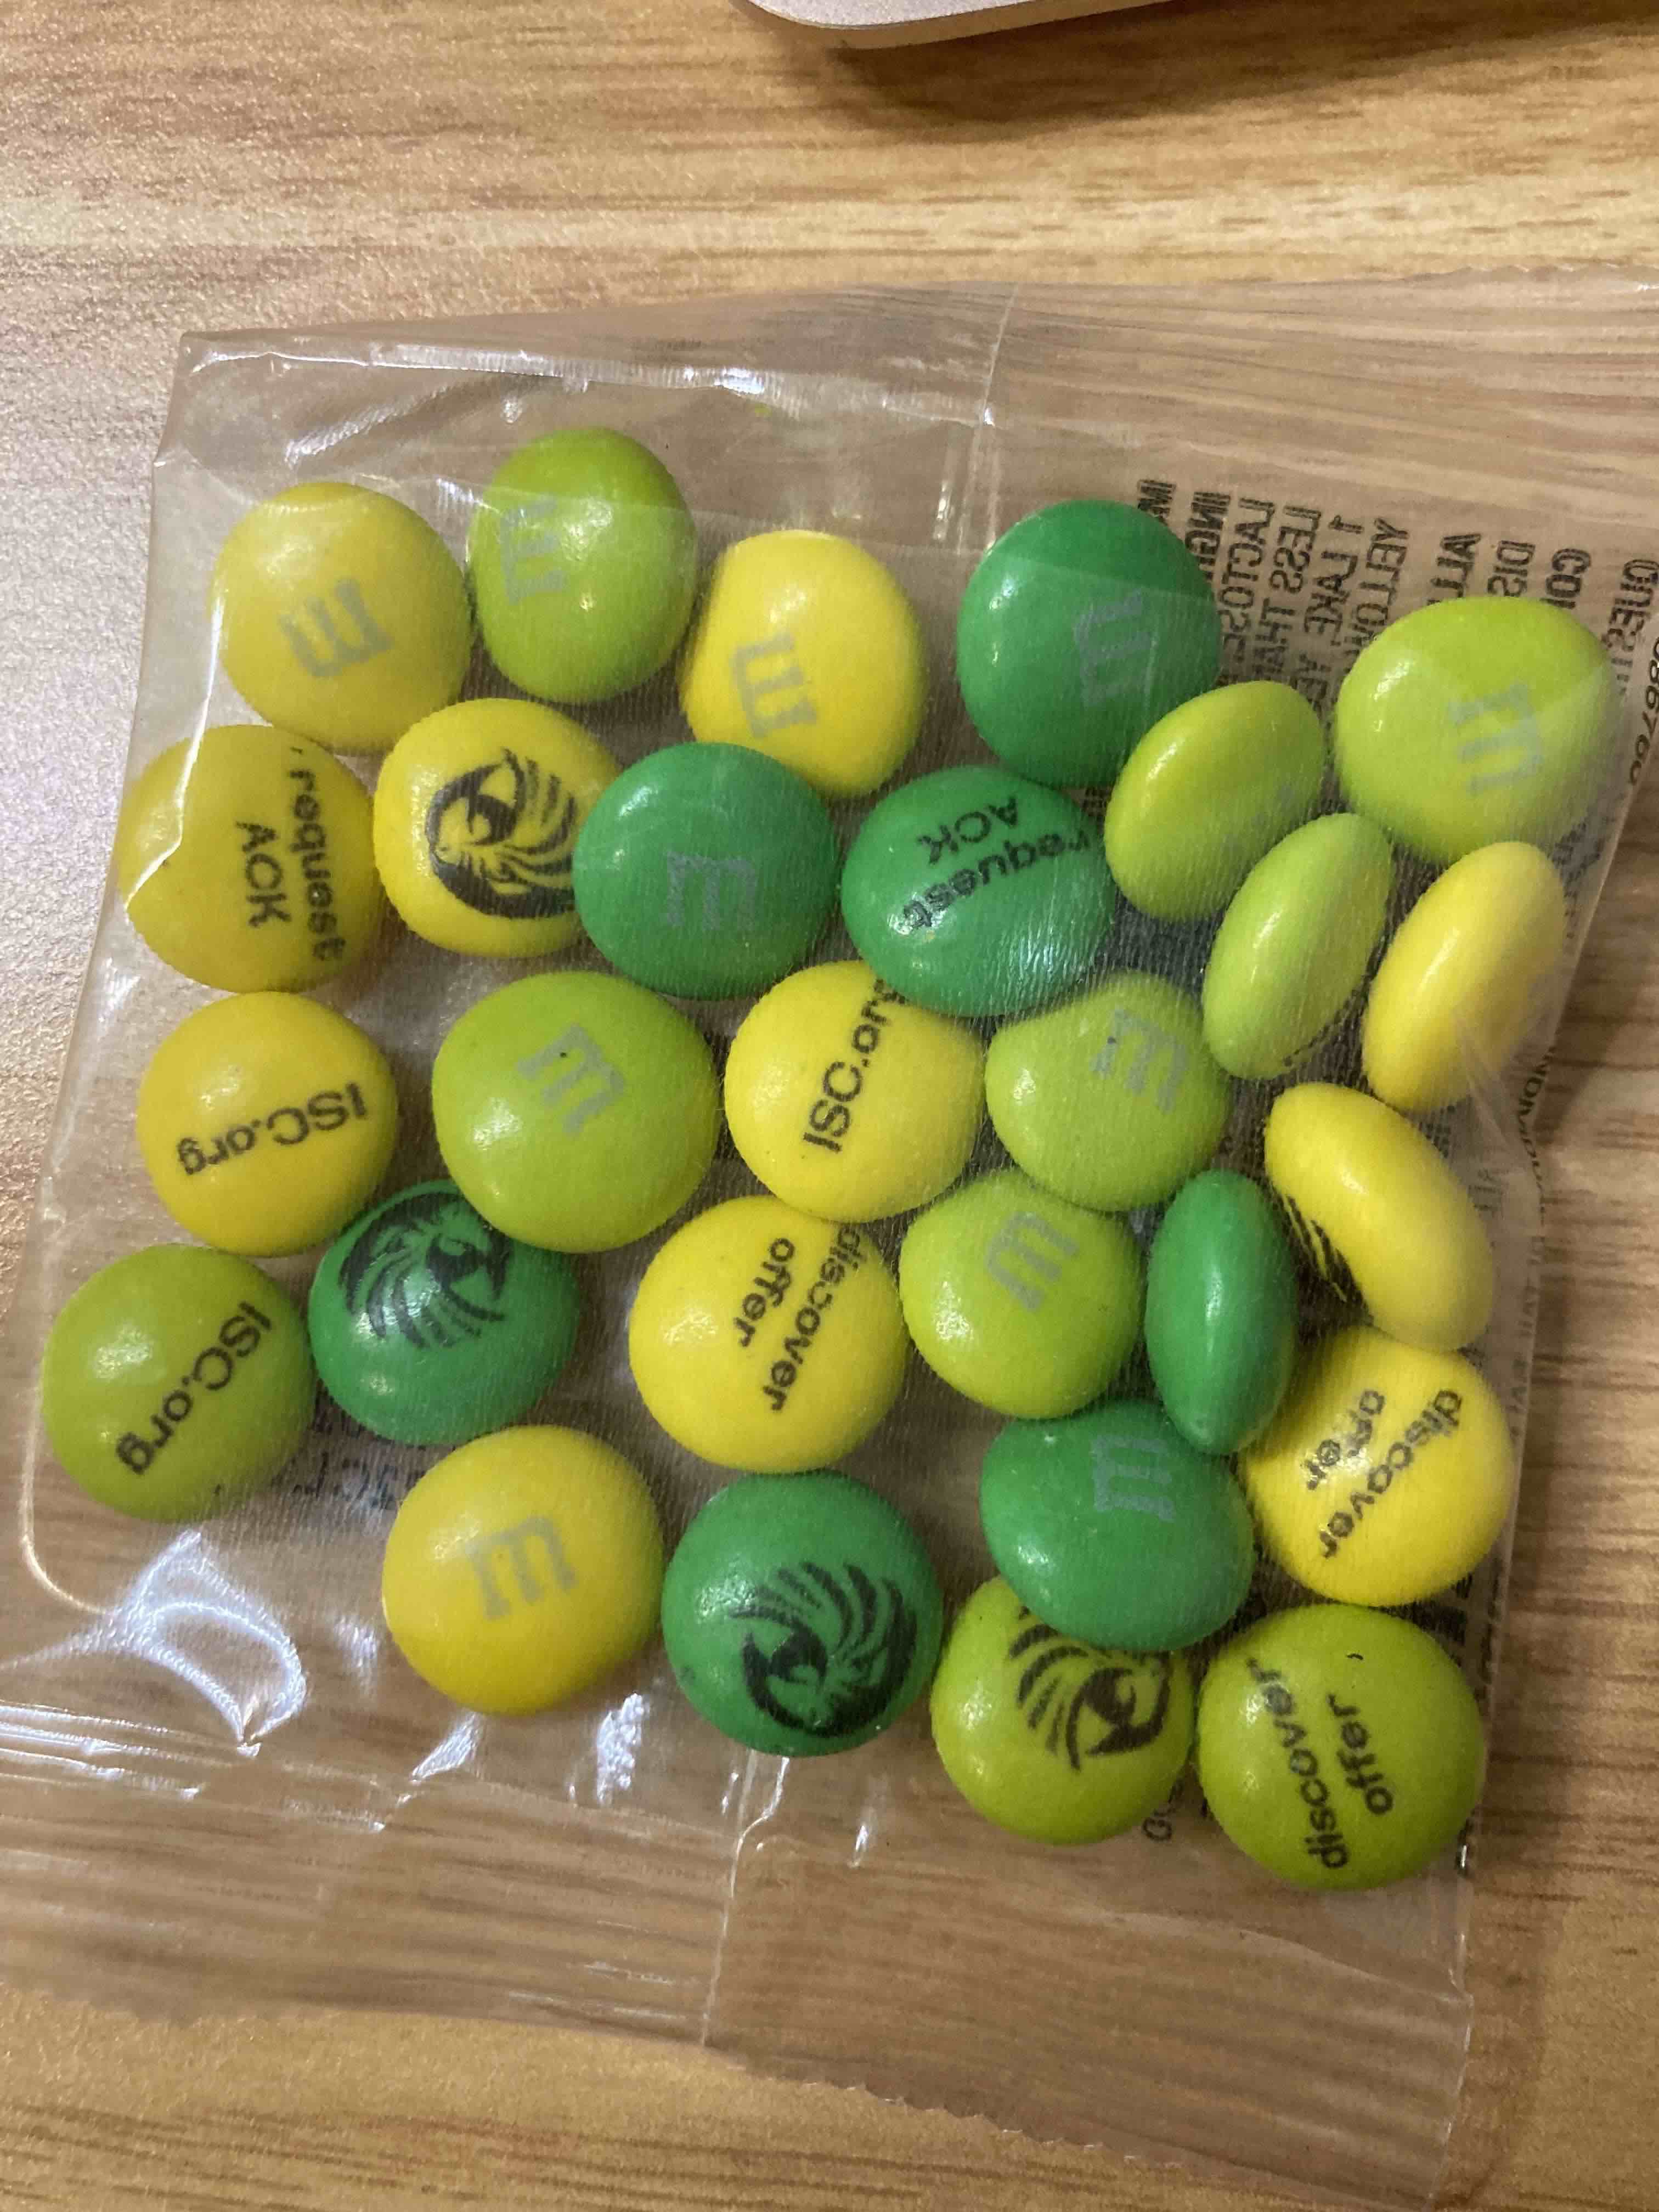 Green, yellow and dark green M&Ms with Discover, Offer, Request and Ack written on them